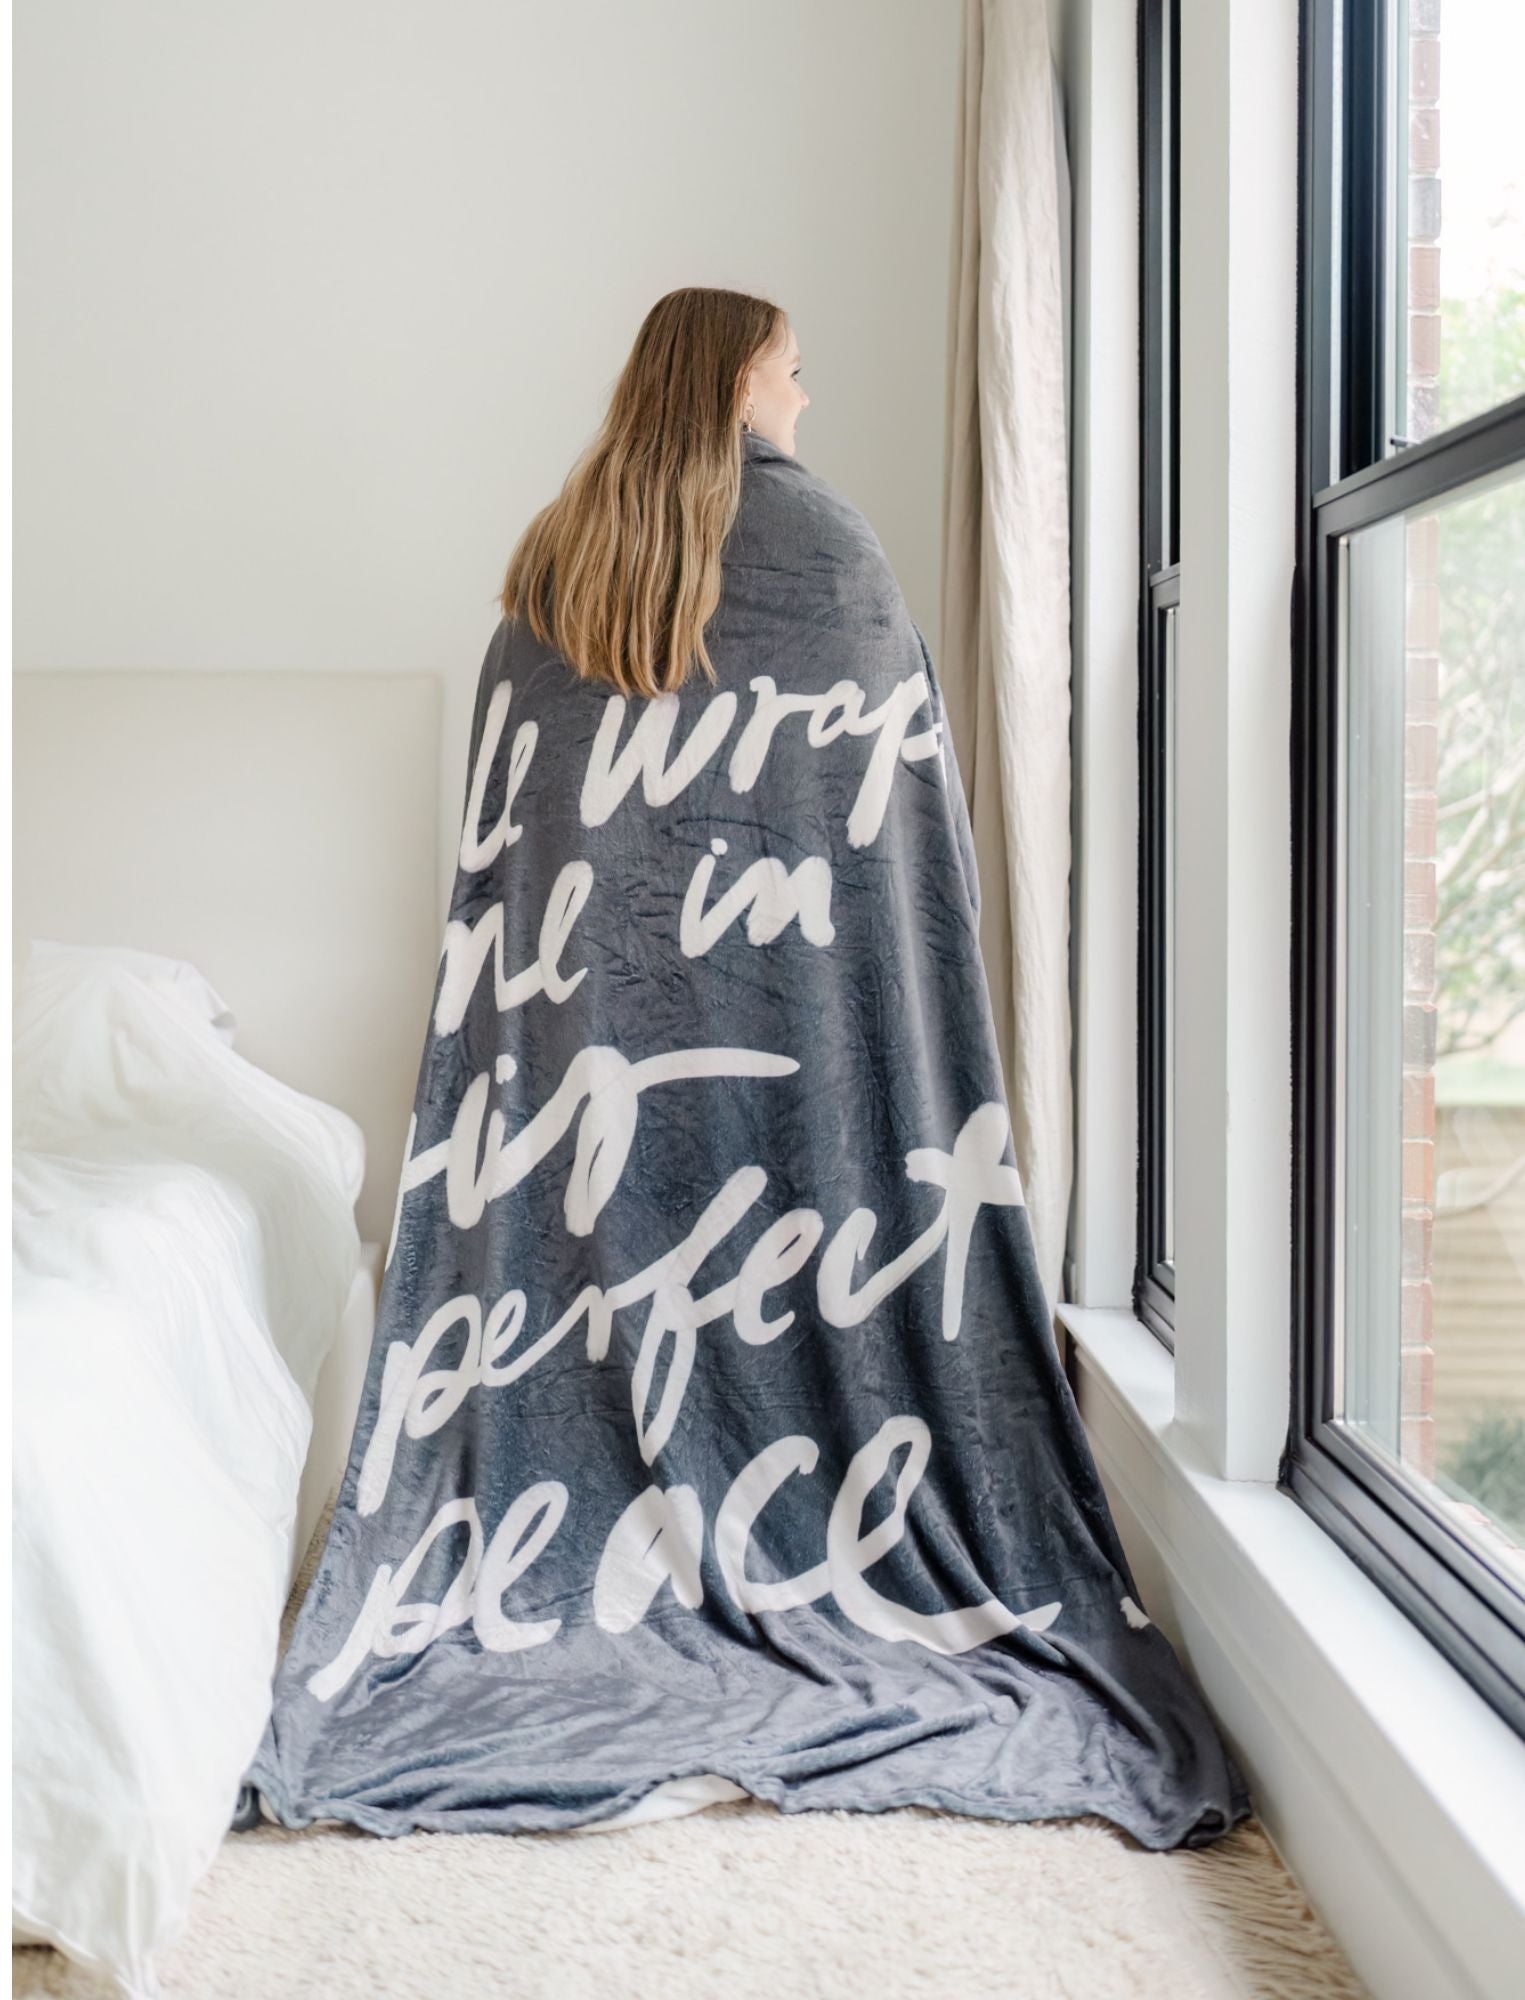 Blanket: He wraps me in His perfect peace